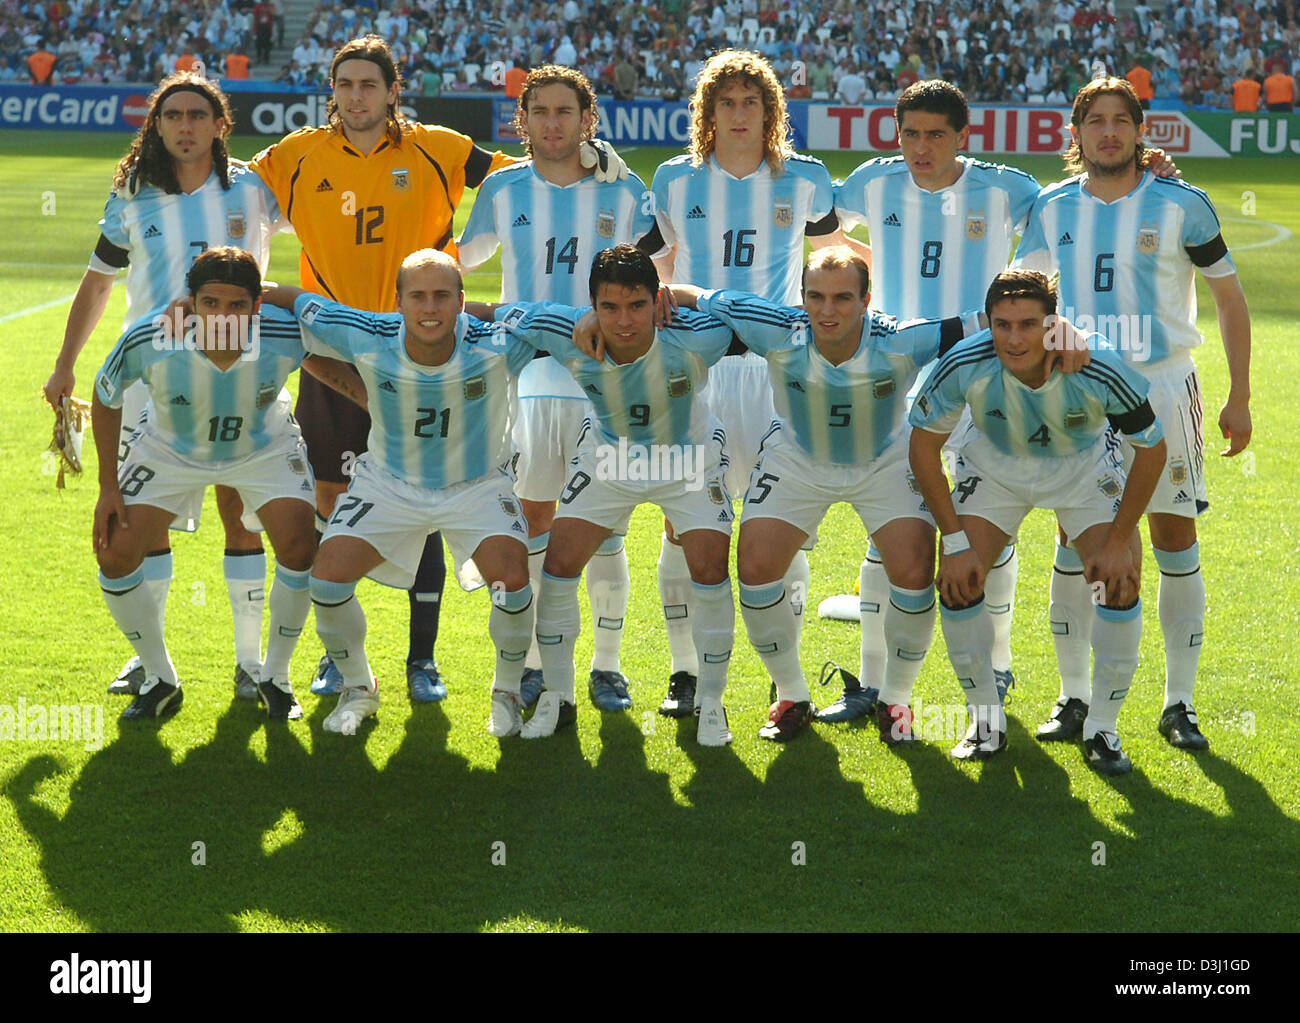 (dpa) - The picture shows the Argentinian National soccer team prior to their semi-final match against Mexico at the FIFA Confederations Cup 2005 tournament in Hanover, Germany,  26 June 2005. In the front row stand Mario Santana, Luciano Figueroa, Javier Saviola, Esteban Cambiasso, Javier Zanetti (L-R) and in the back Juan Sorin, German Lux, Gabriel Milito, Fabricio Coloccini, Jua Stock Photo